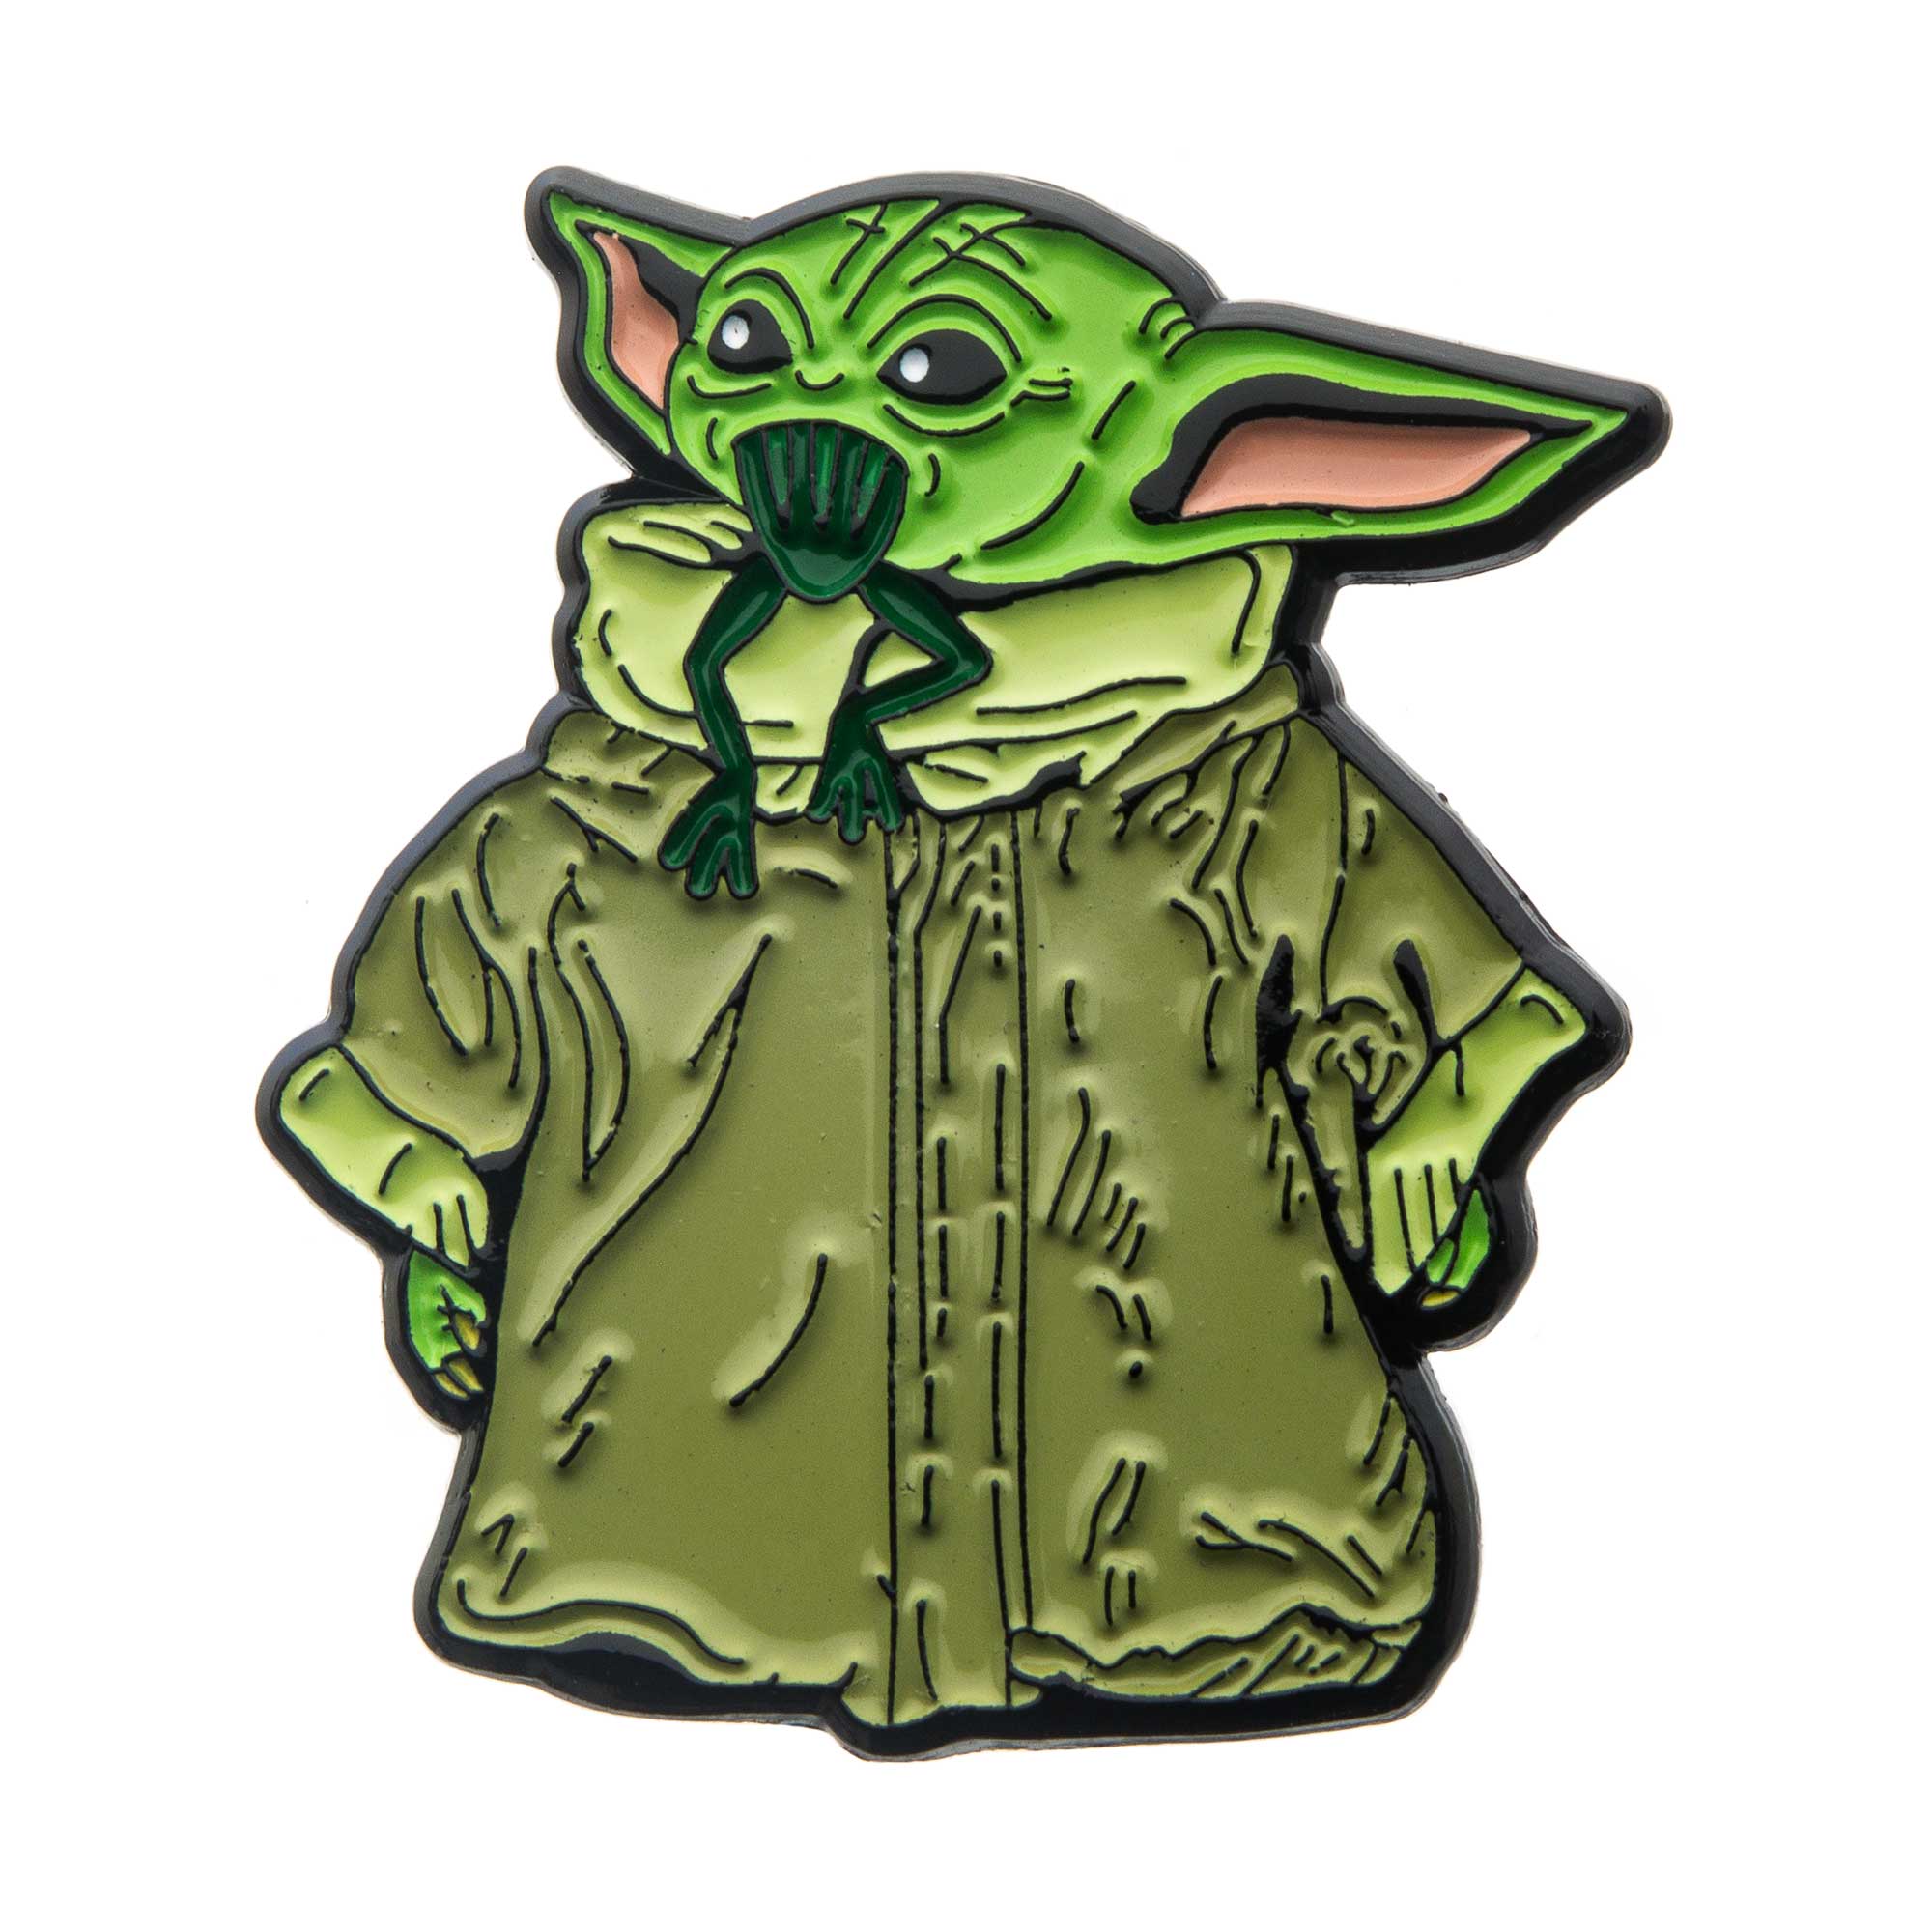 Star Wars The Mandalorian Grogu The Child Eating Frog Enamel Pin [NOT AVAILABLE]